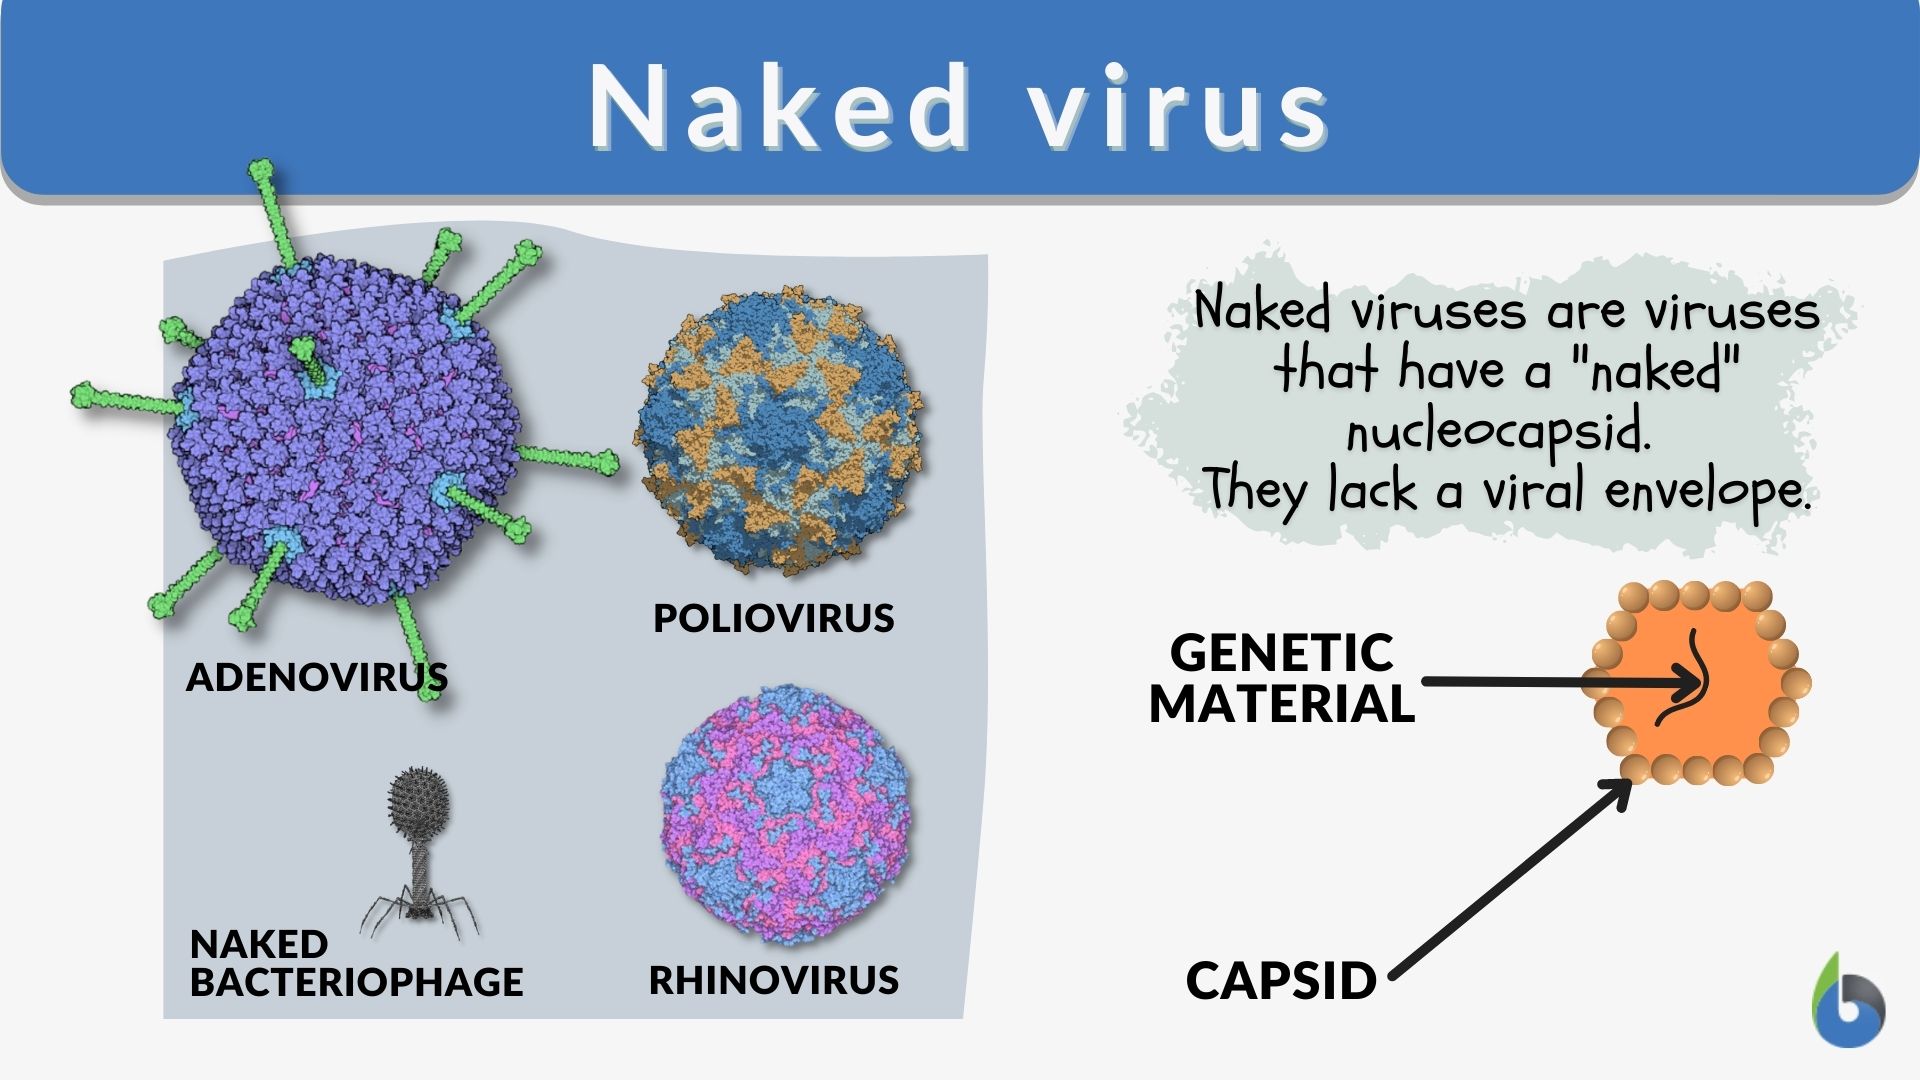 Naked virus - Definition and Examples - Biology Online Dictionary